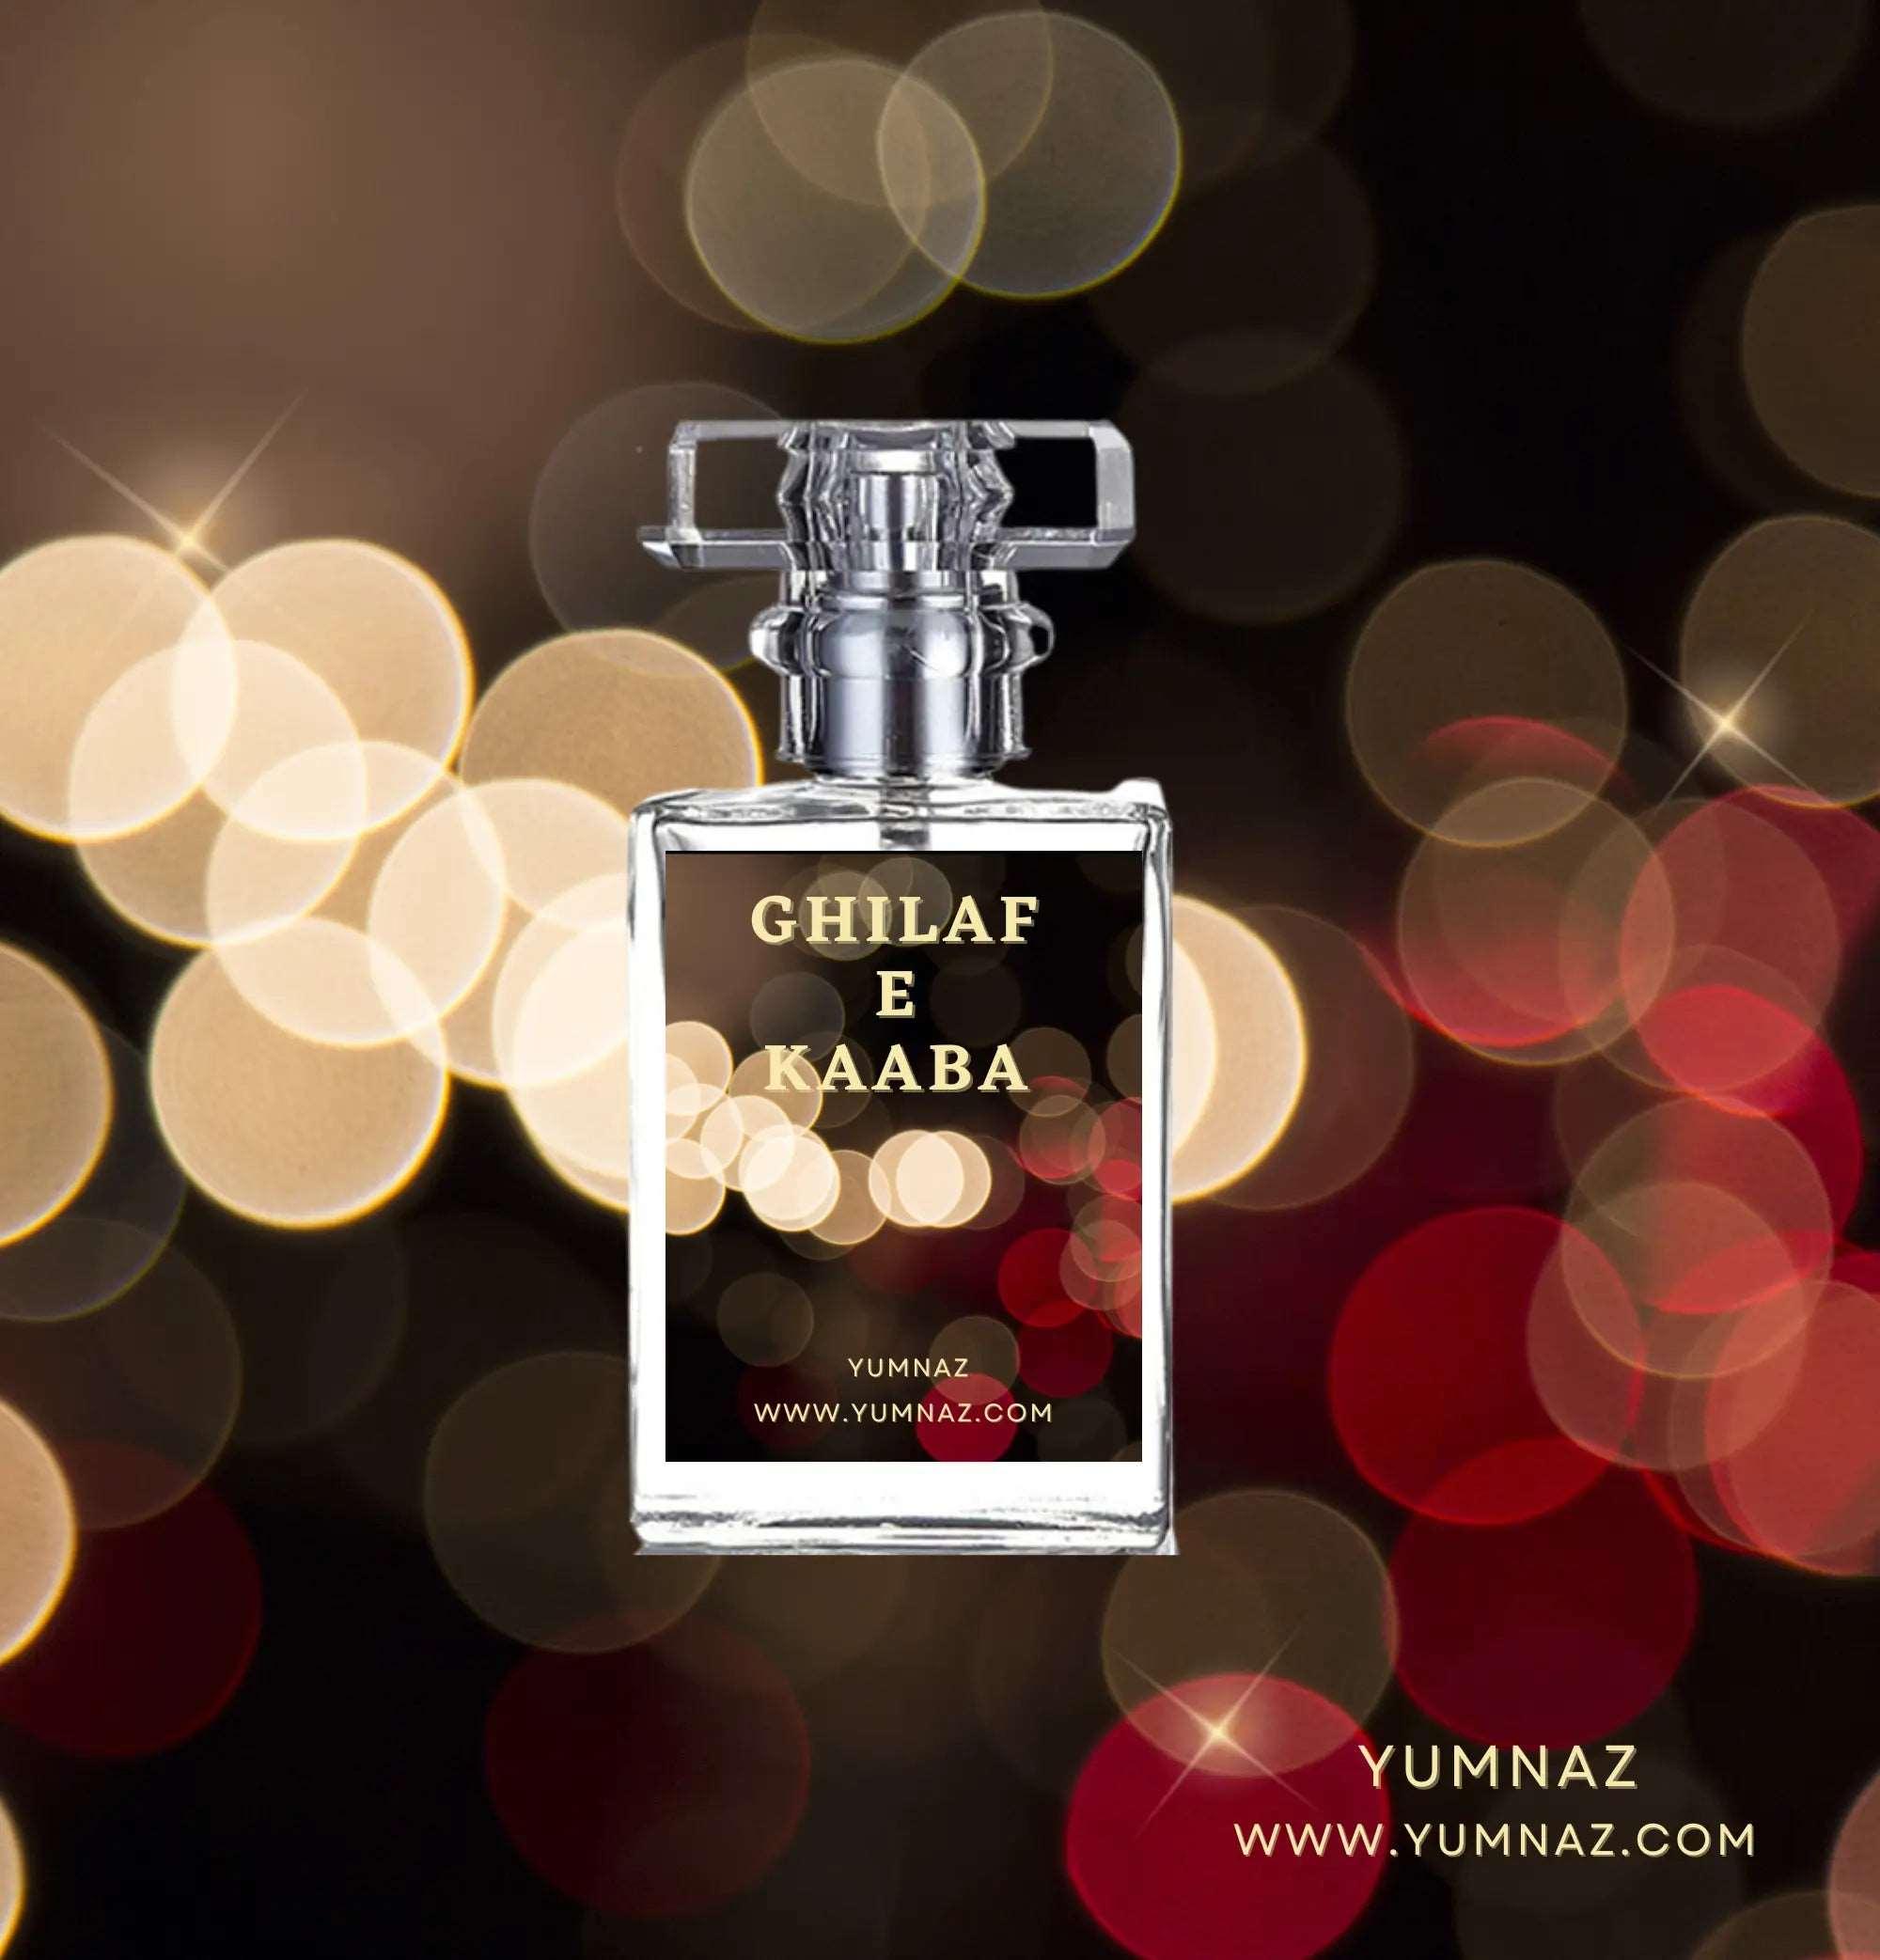 Get the best price of Ghilaf E Kaaba Attar in Pakistan - yumnaz